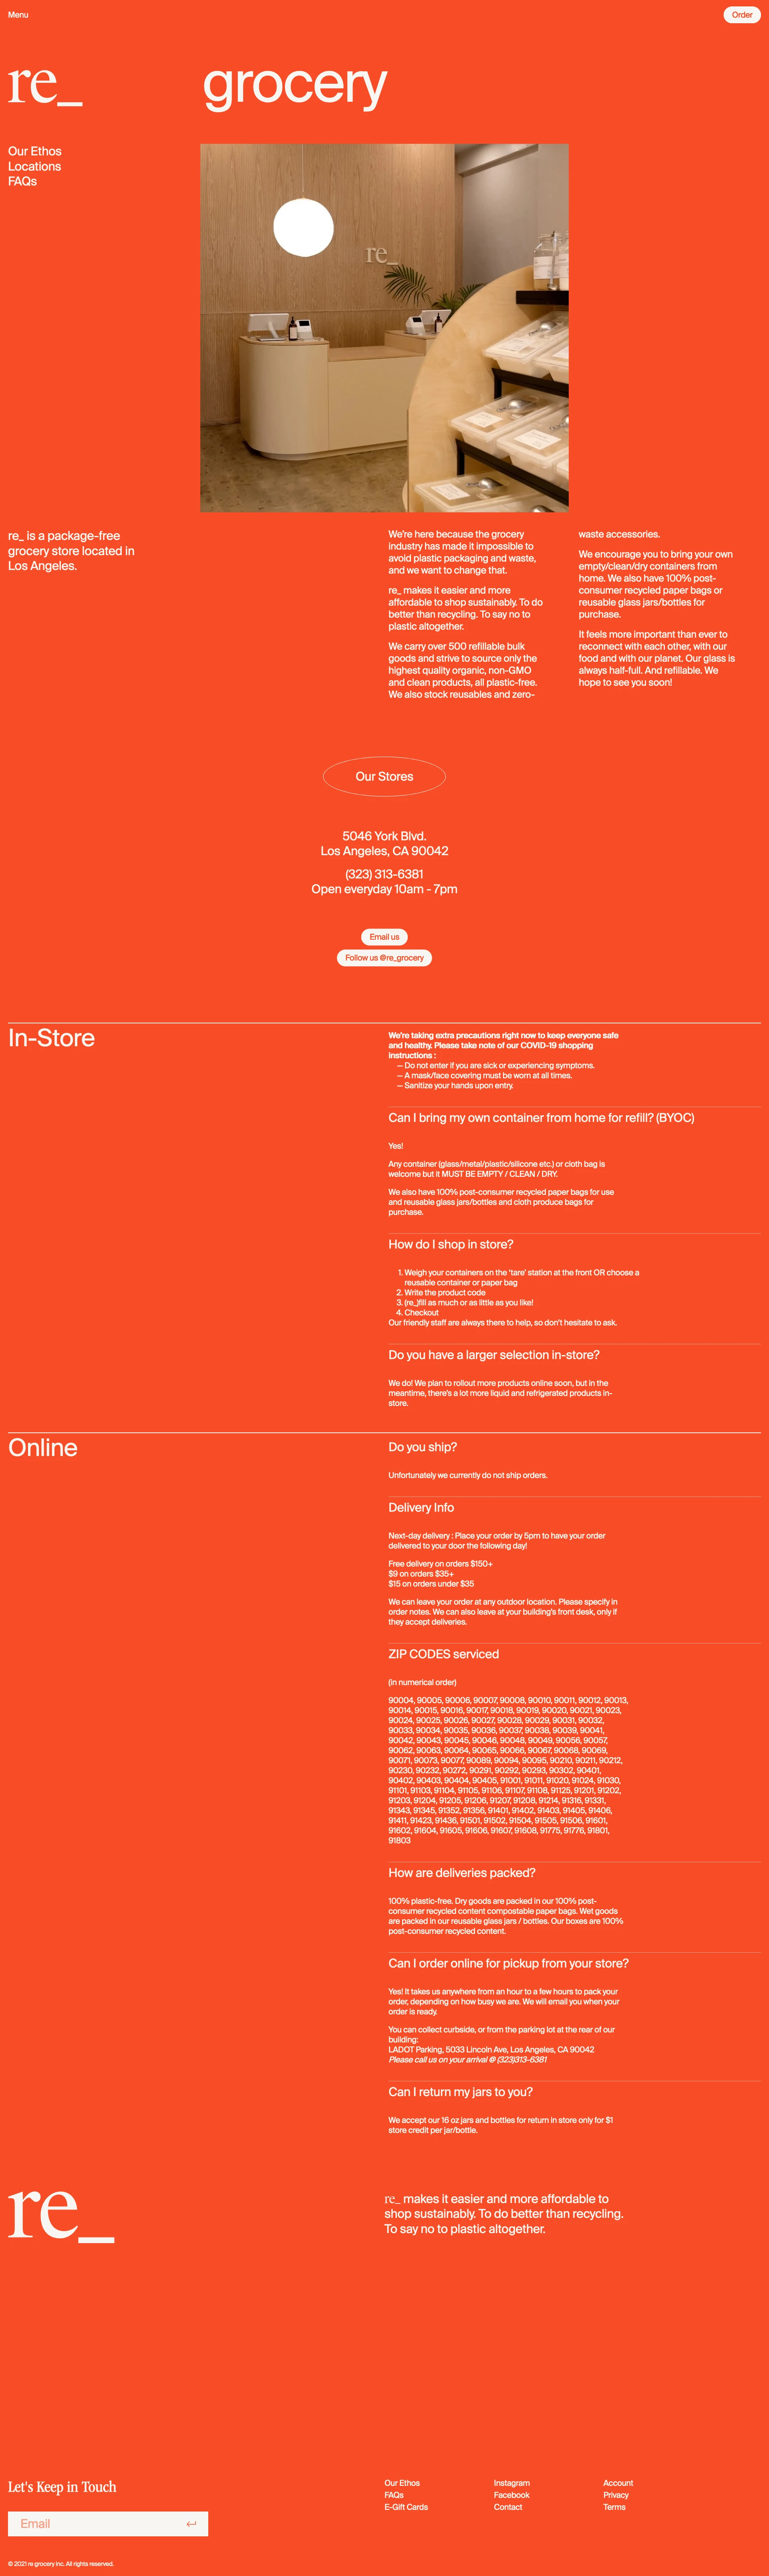 re_ Landing Page Example: re_ is a package-free grocery store located in Los Angeles. We make it easier and more affordable to shop sustainably. To do better than recycling. To say no to plastic altogether.